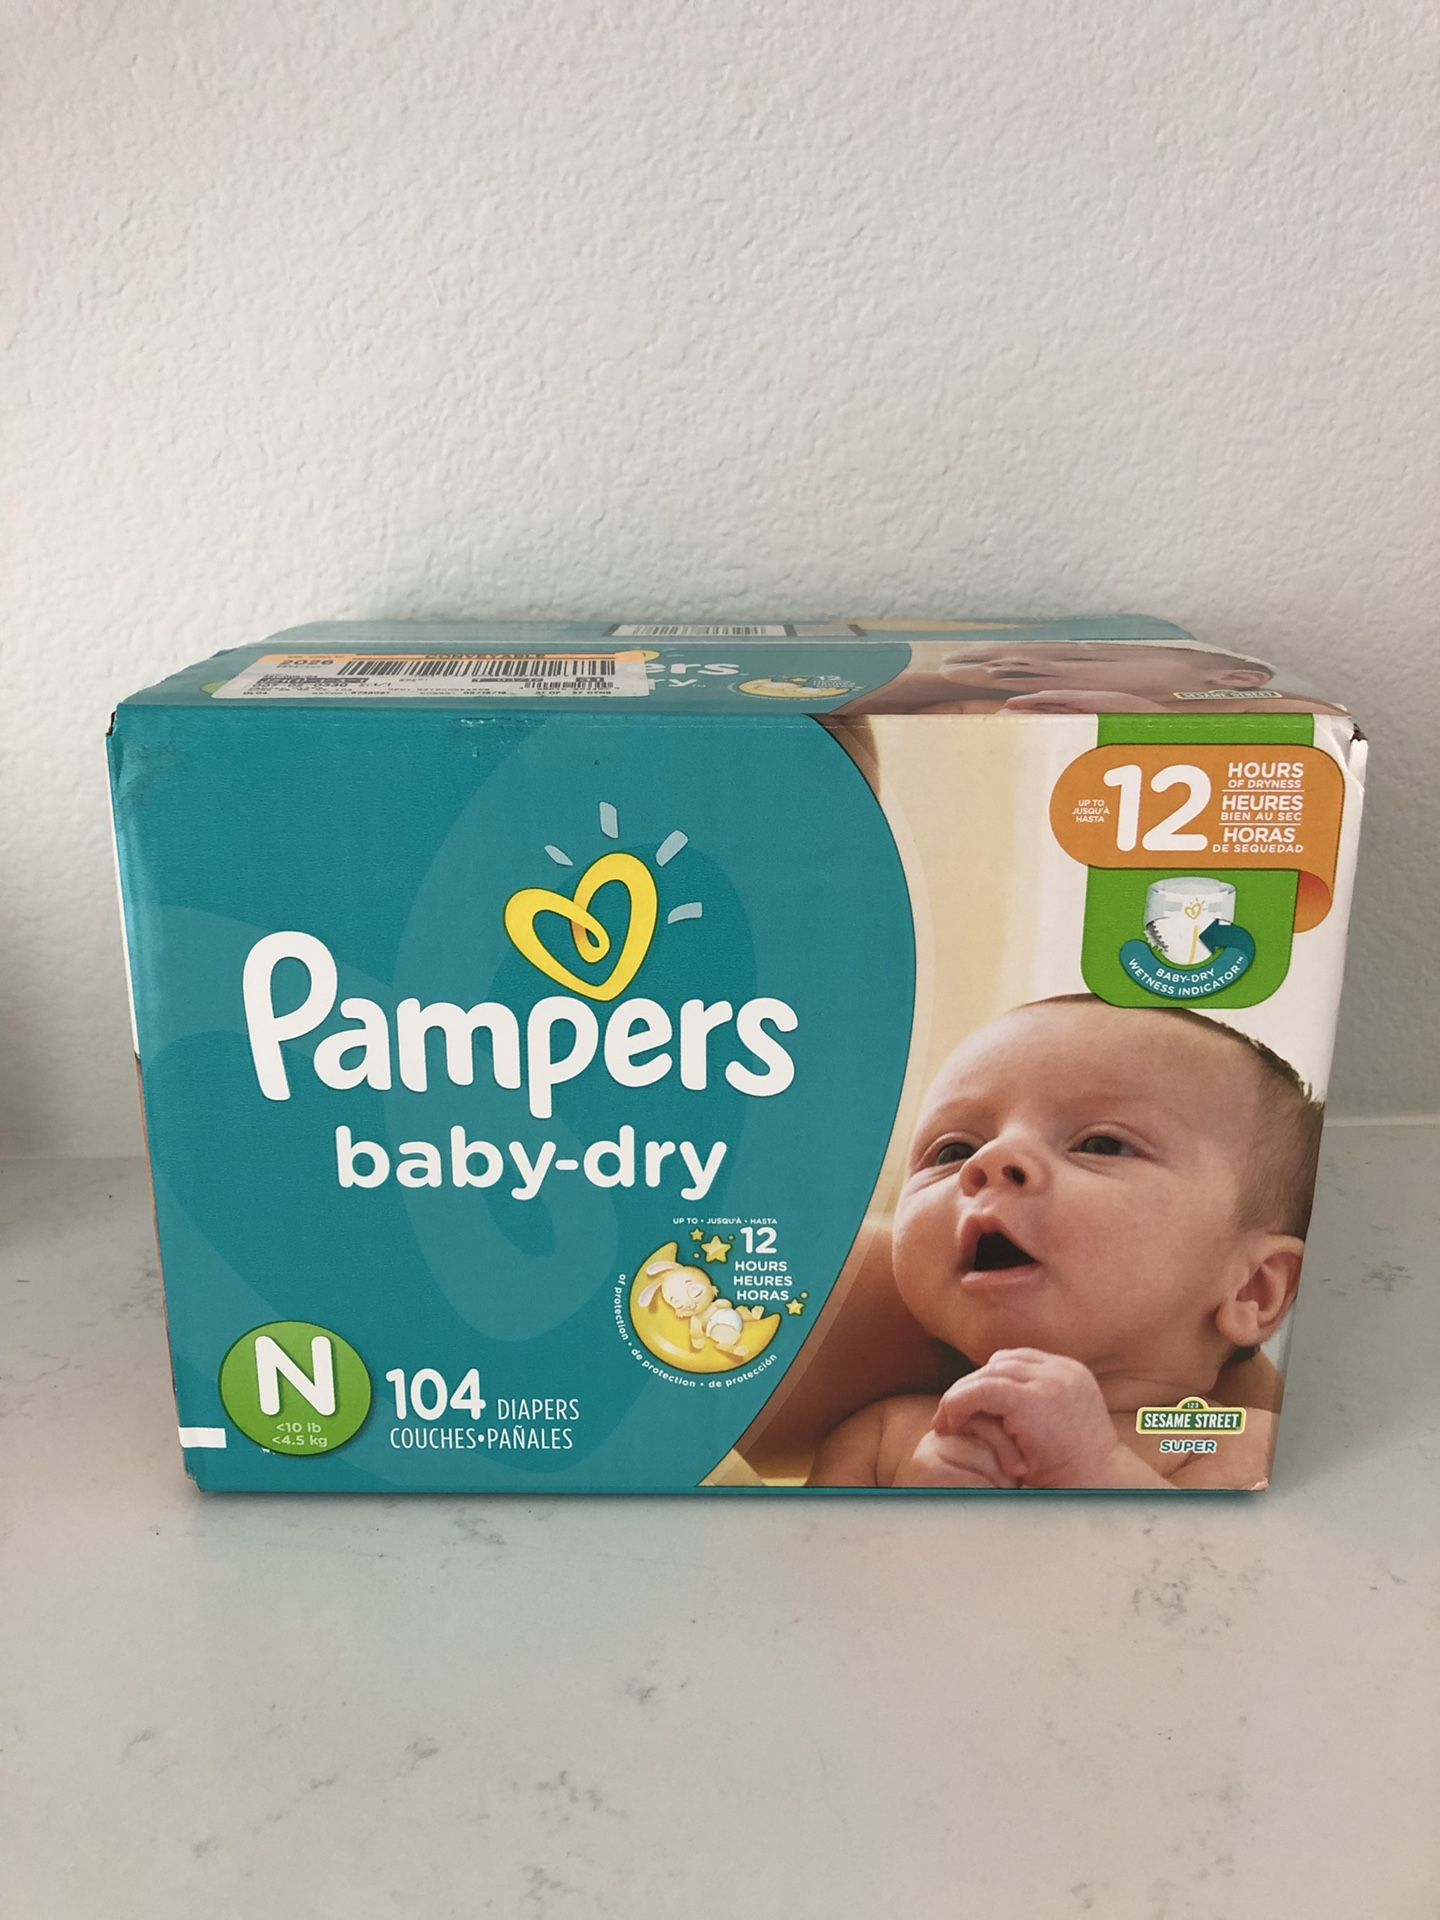 Diapers Pampers Newborn size